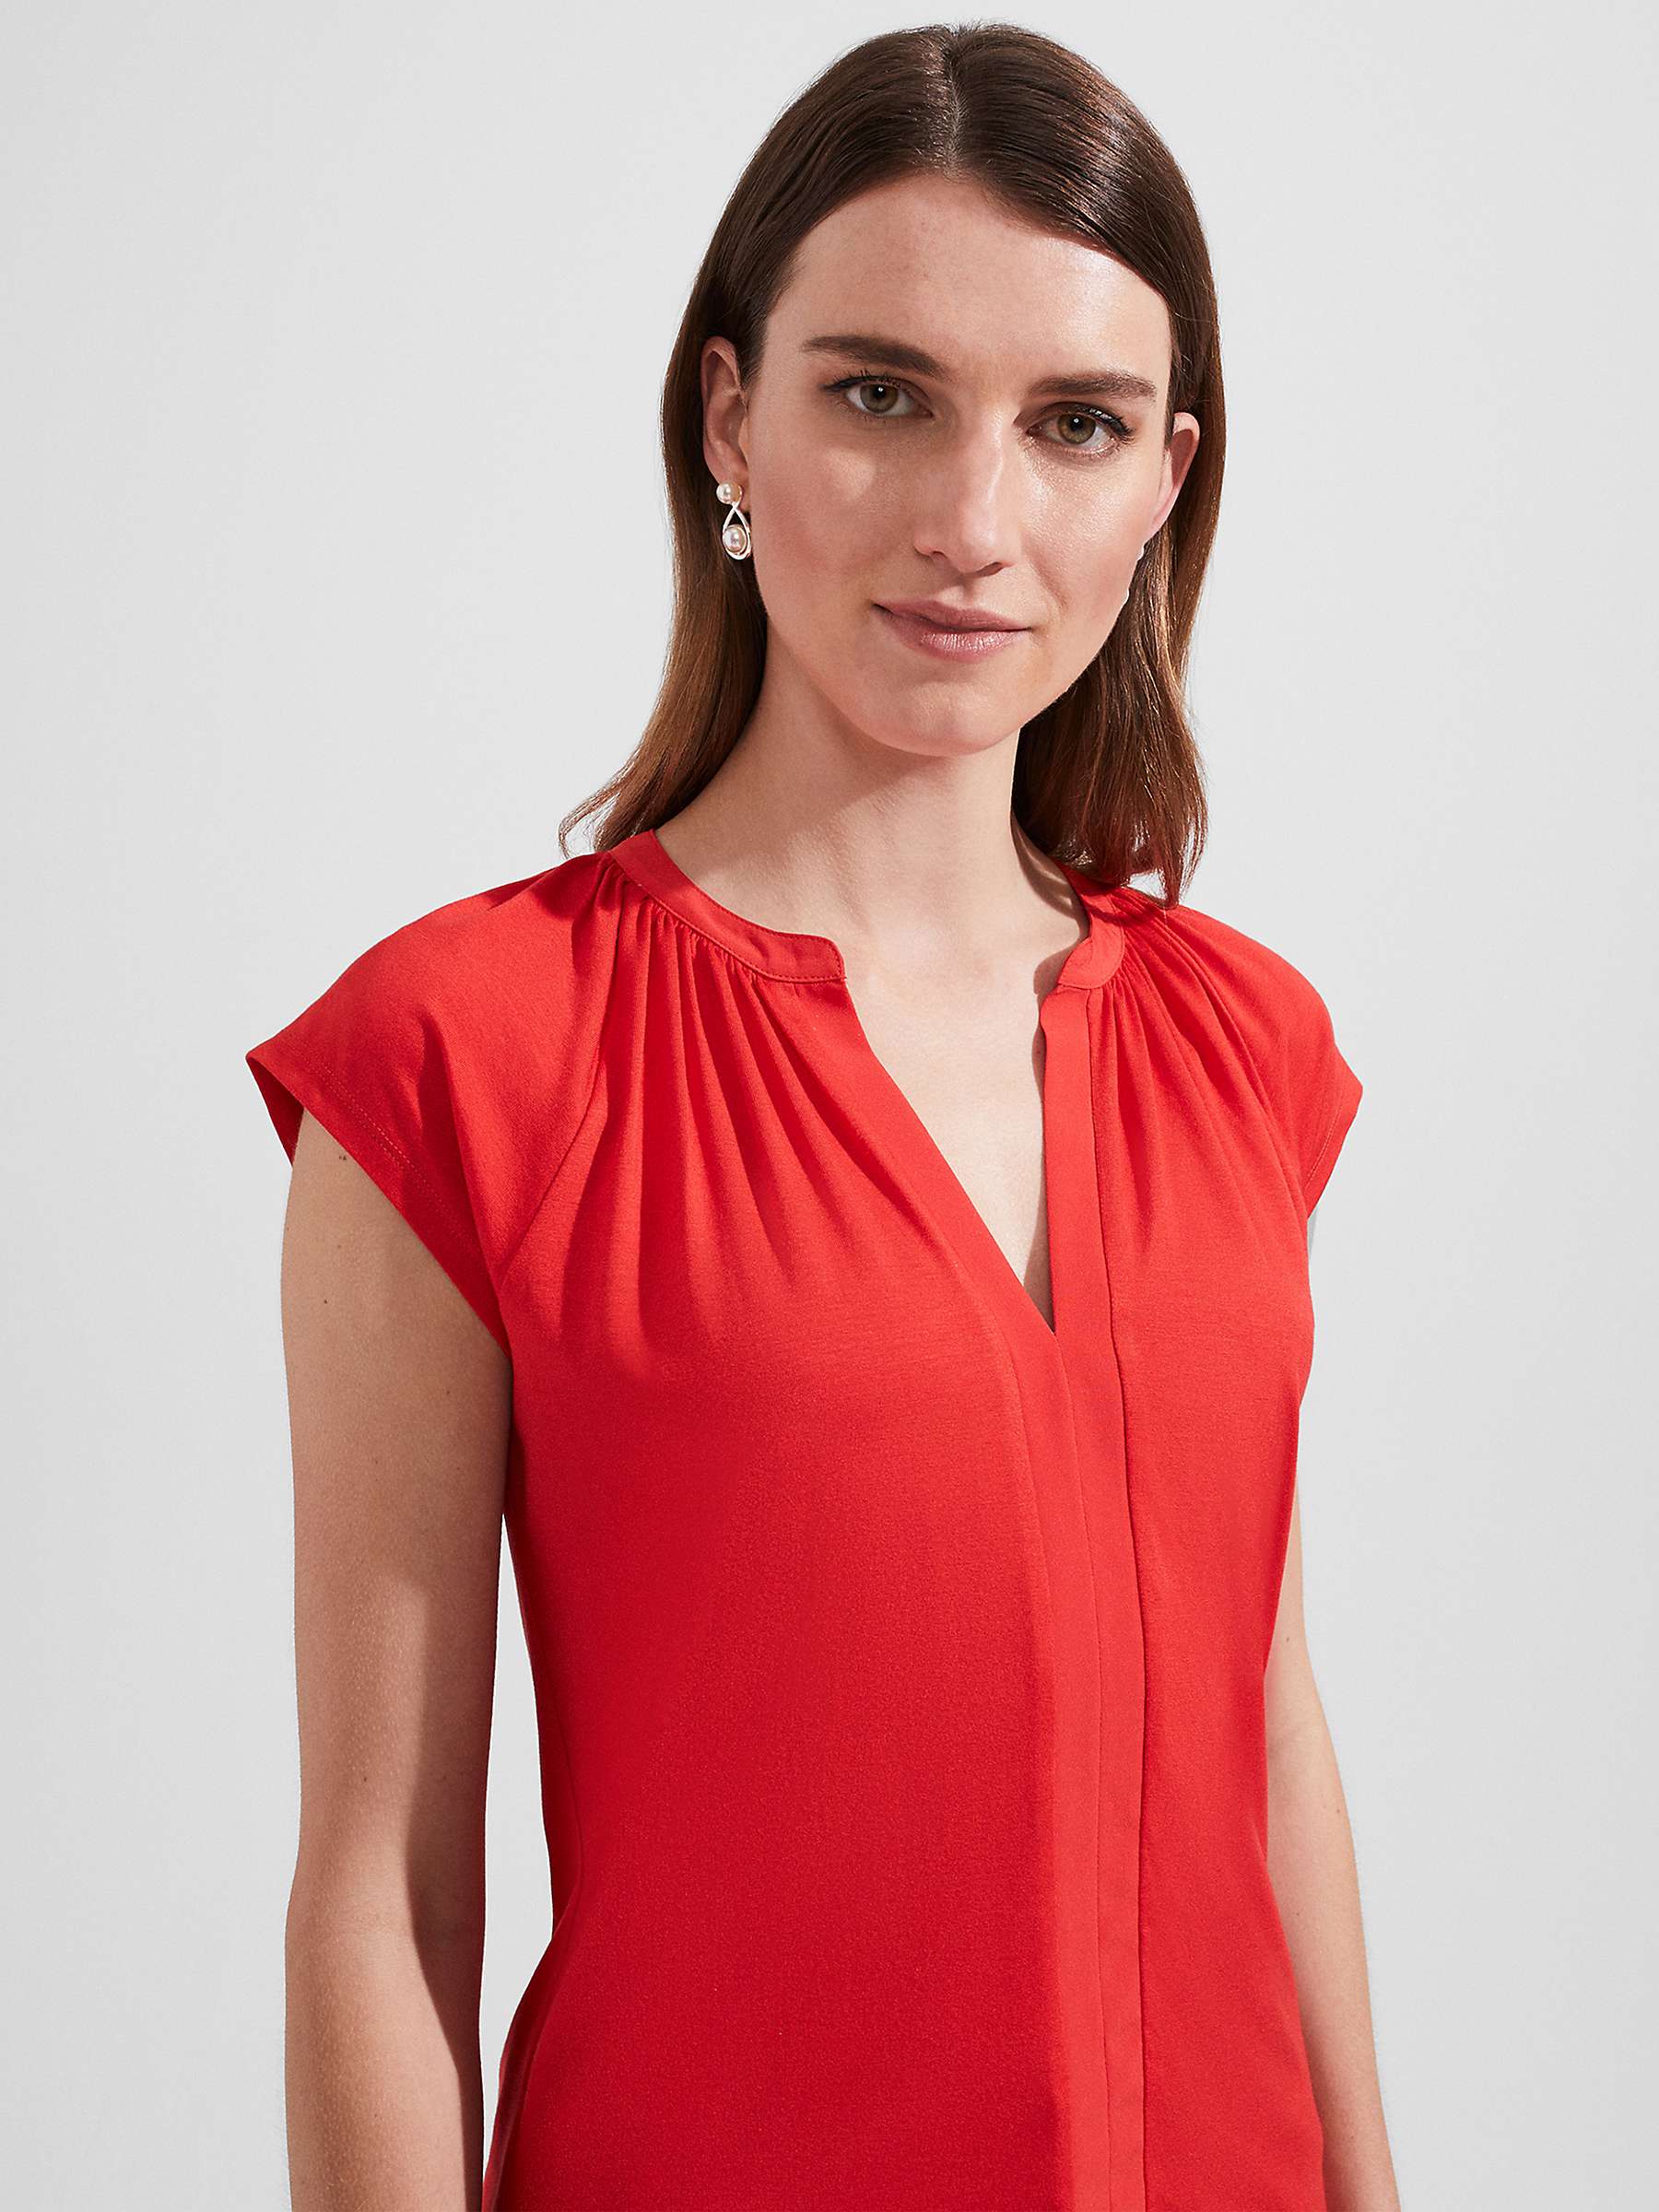 Hobbs Sydney Top, Flame Red at John Lewis & Partners